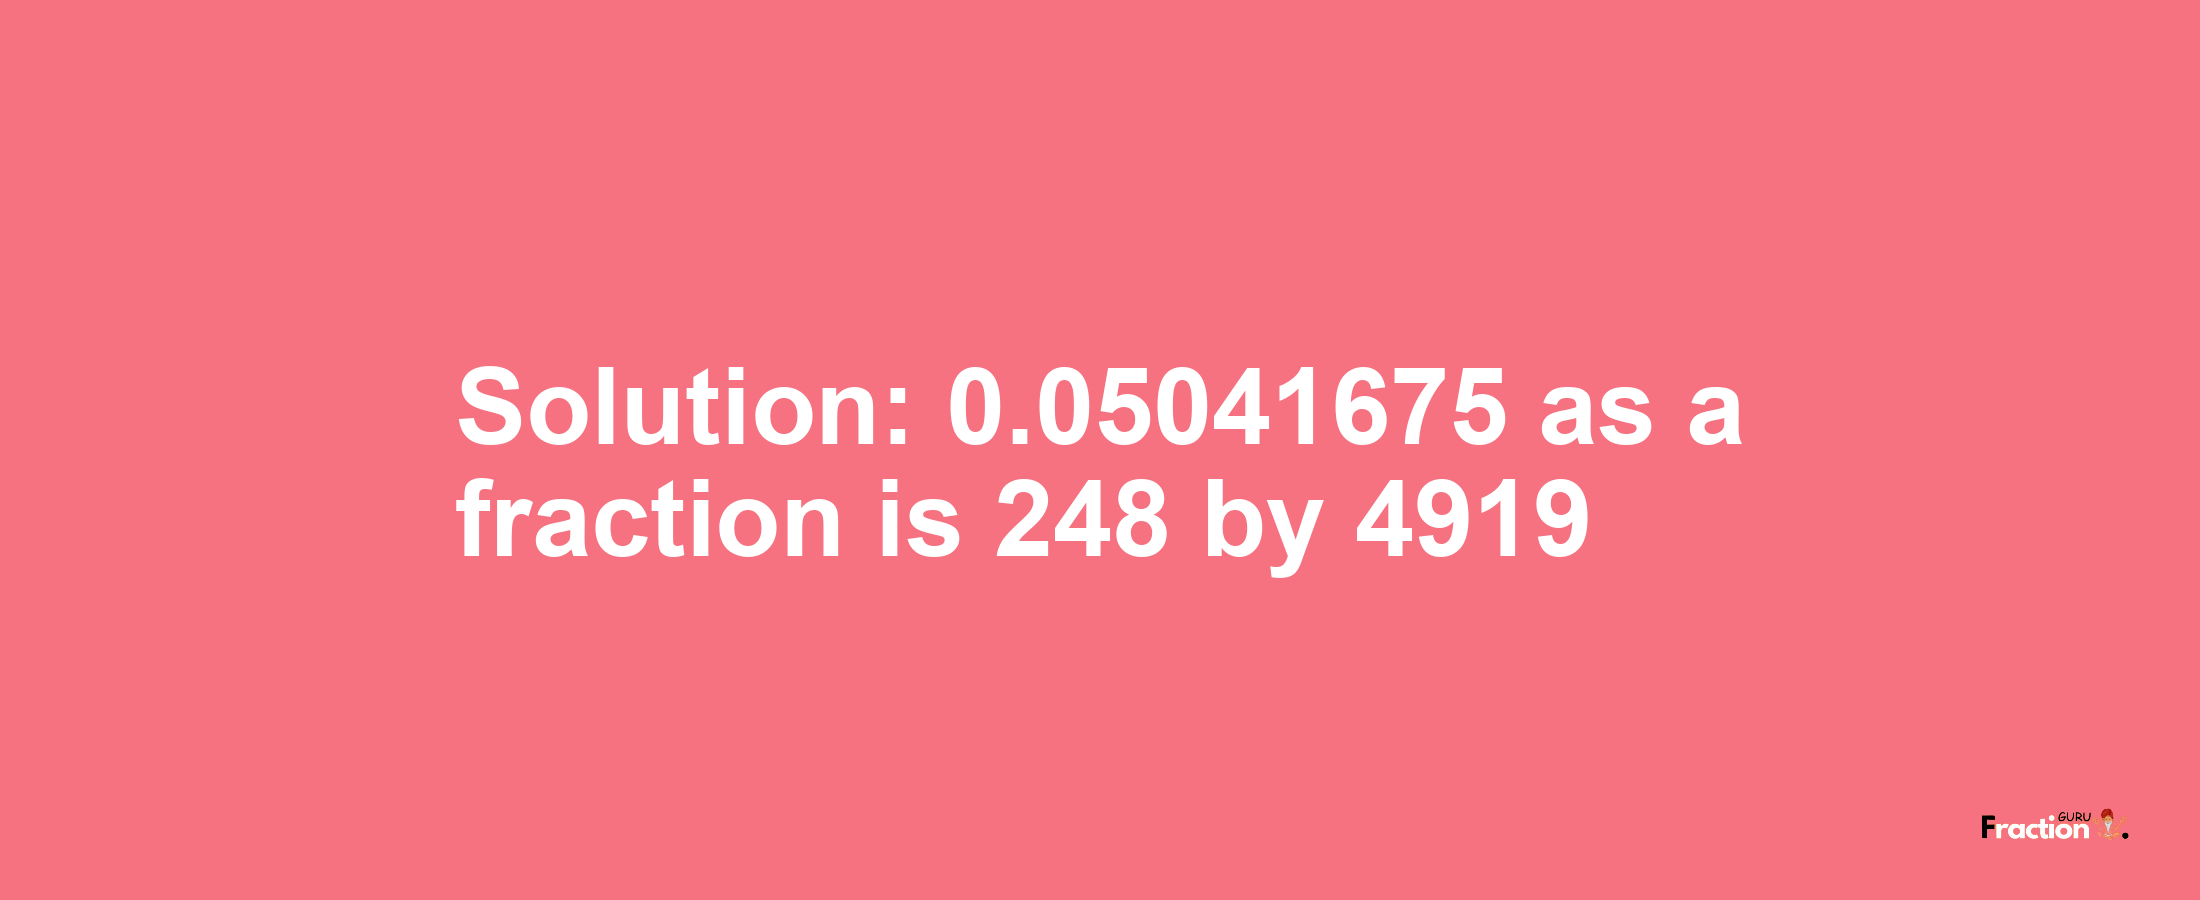 Solution:0.05041675 as a fraction is 248/4919